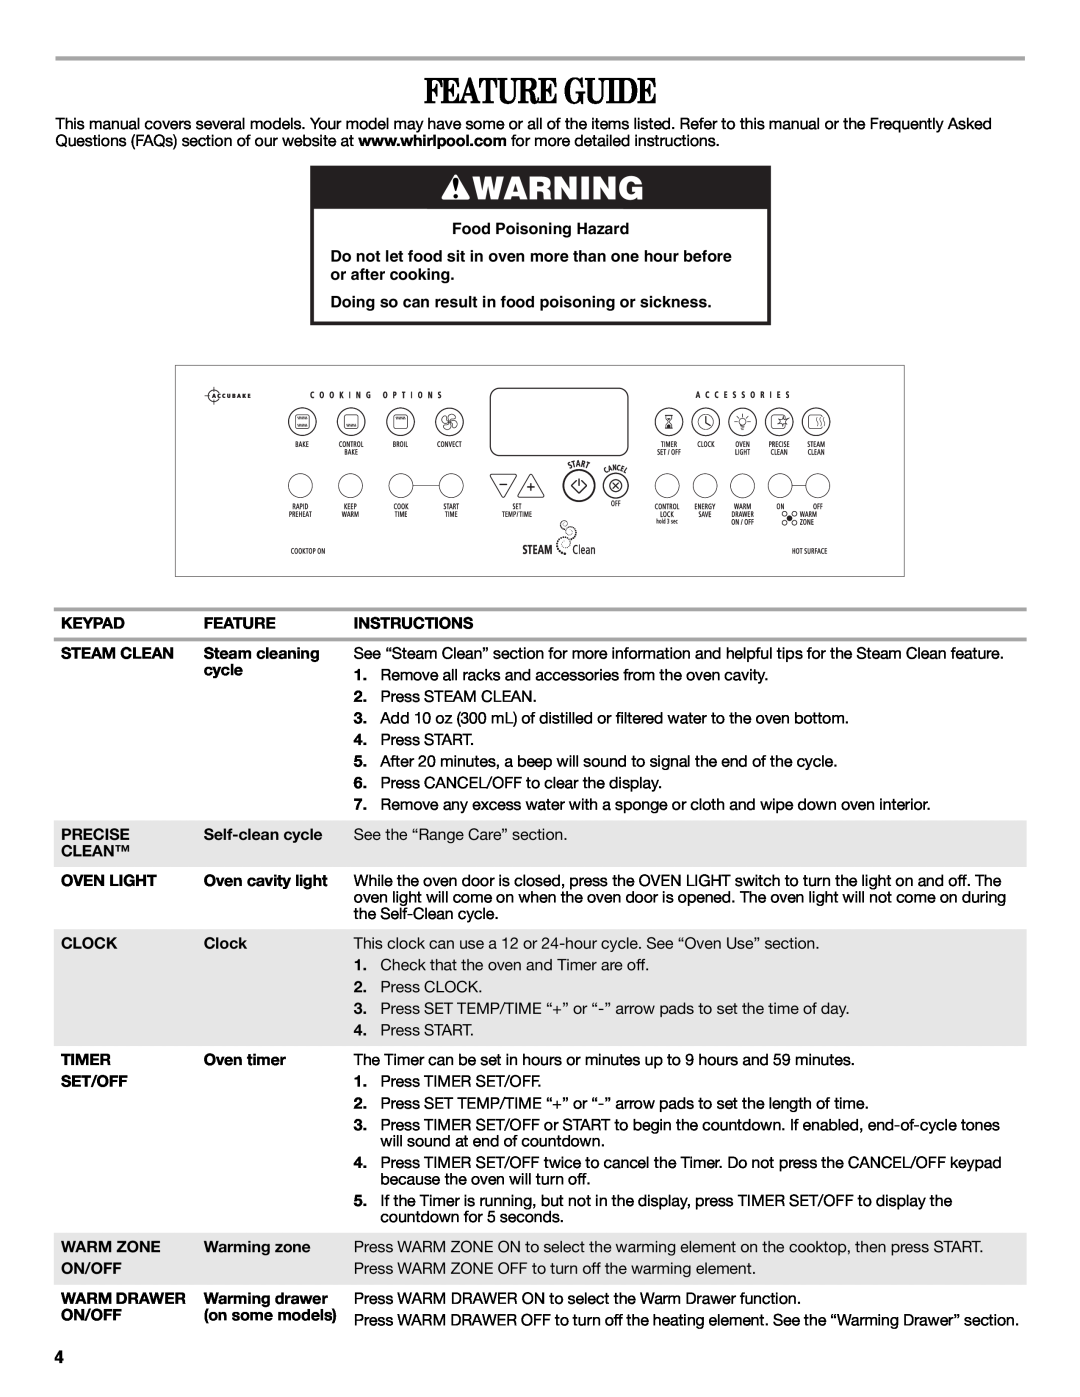 Whirlpool W10200354B, W10204499A Feature Guide, Food Poisoning Hazard, Doing so can result in food poisoning or sickness 